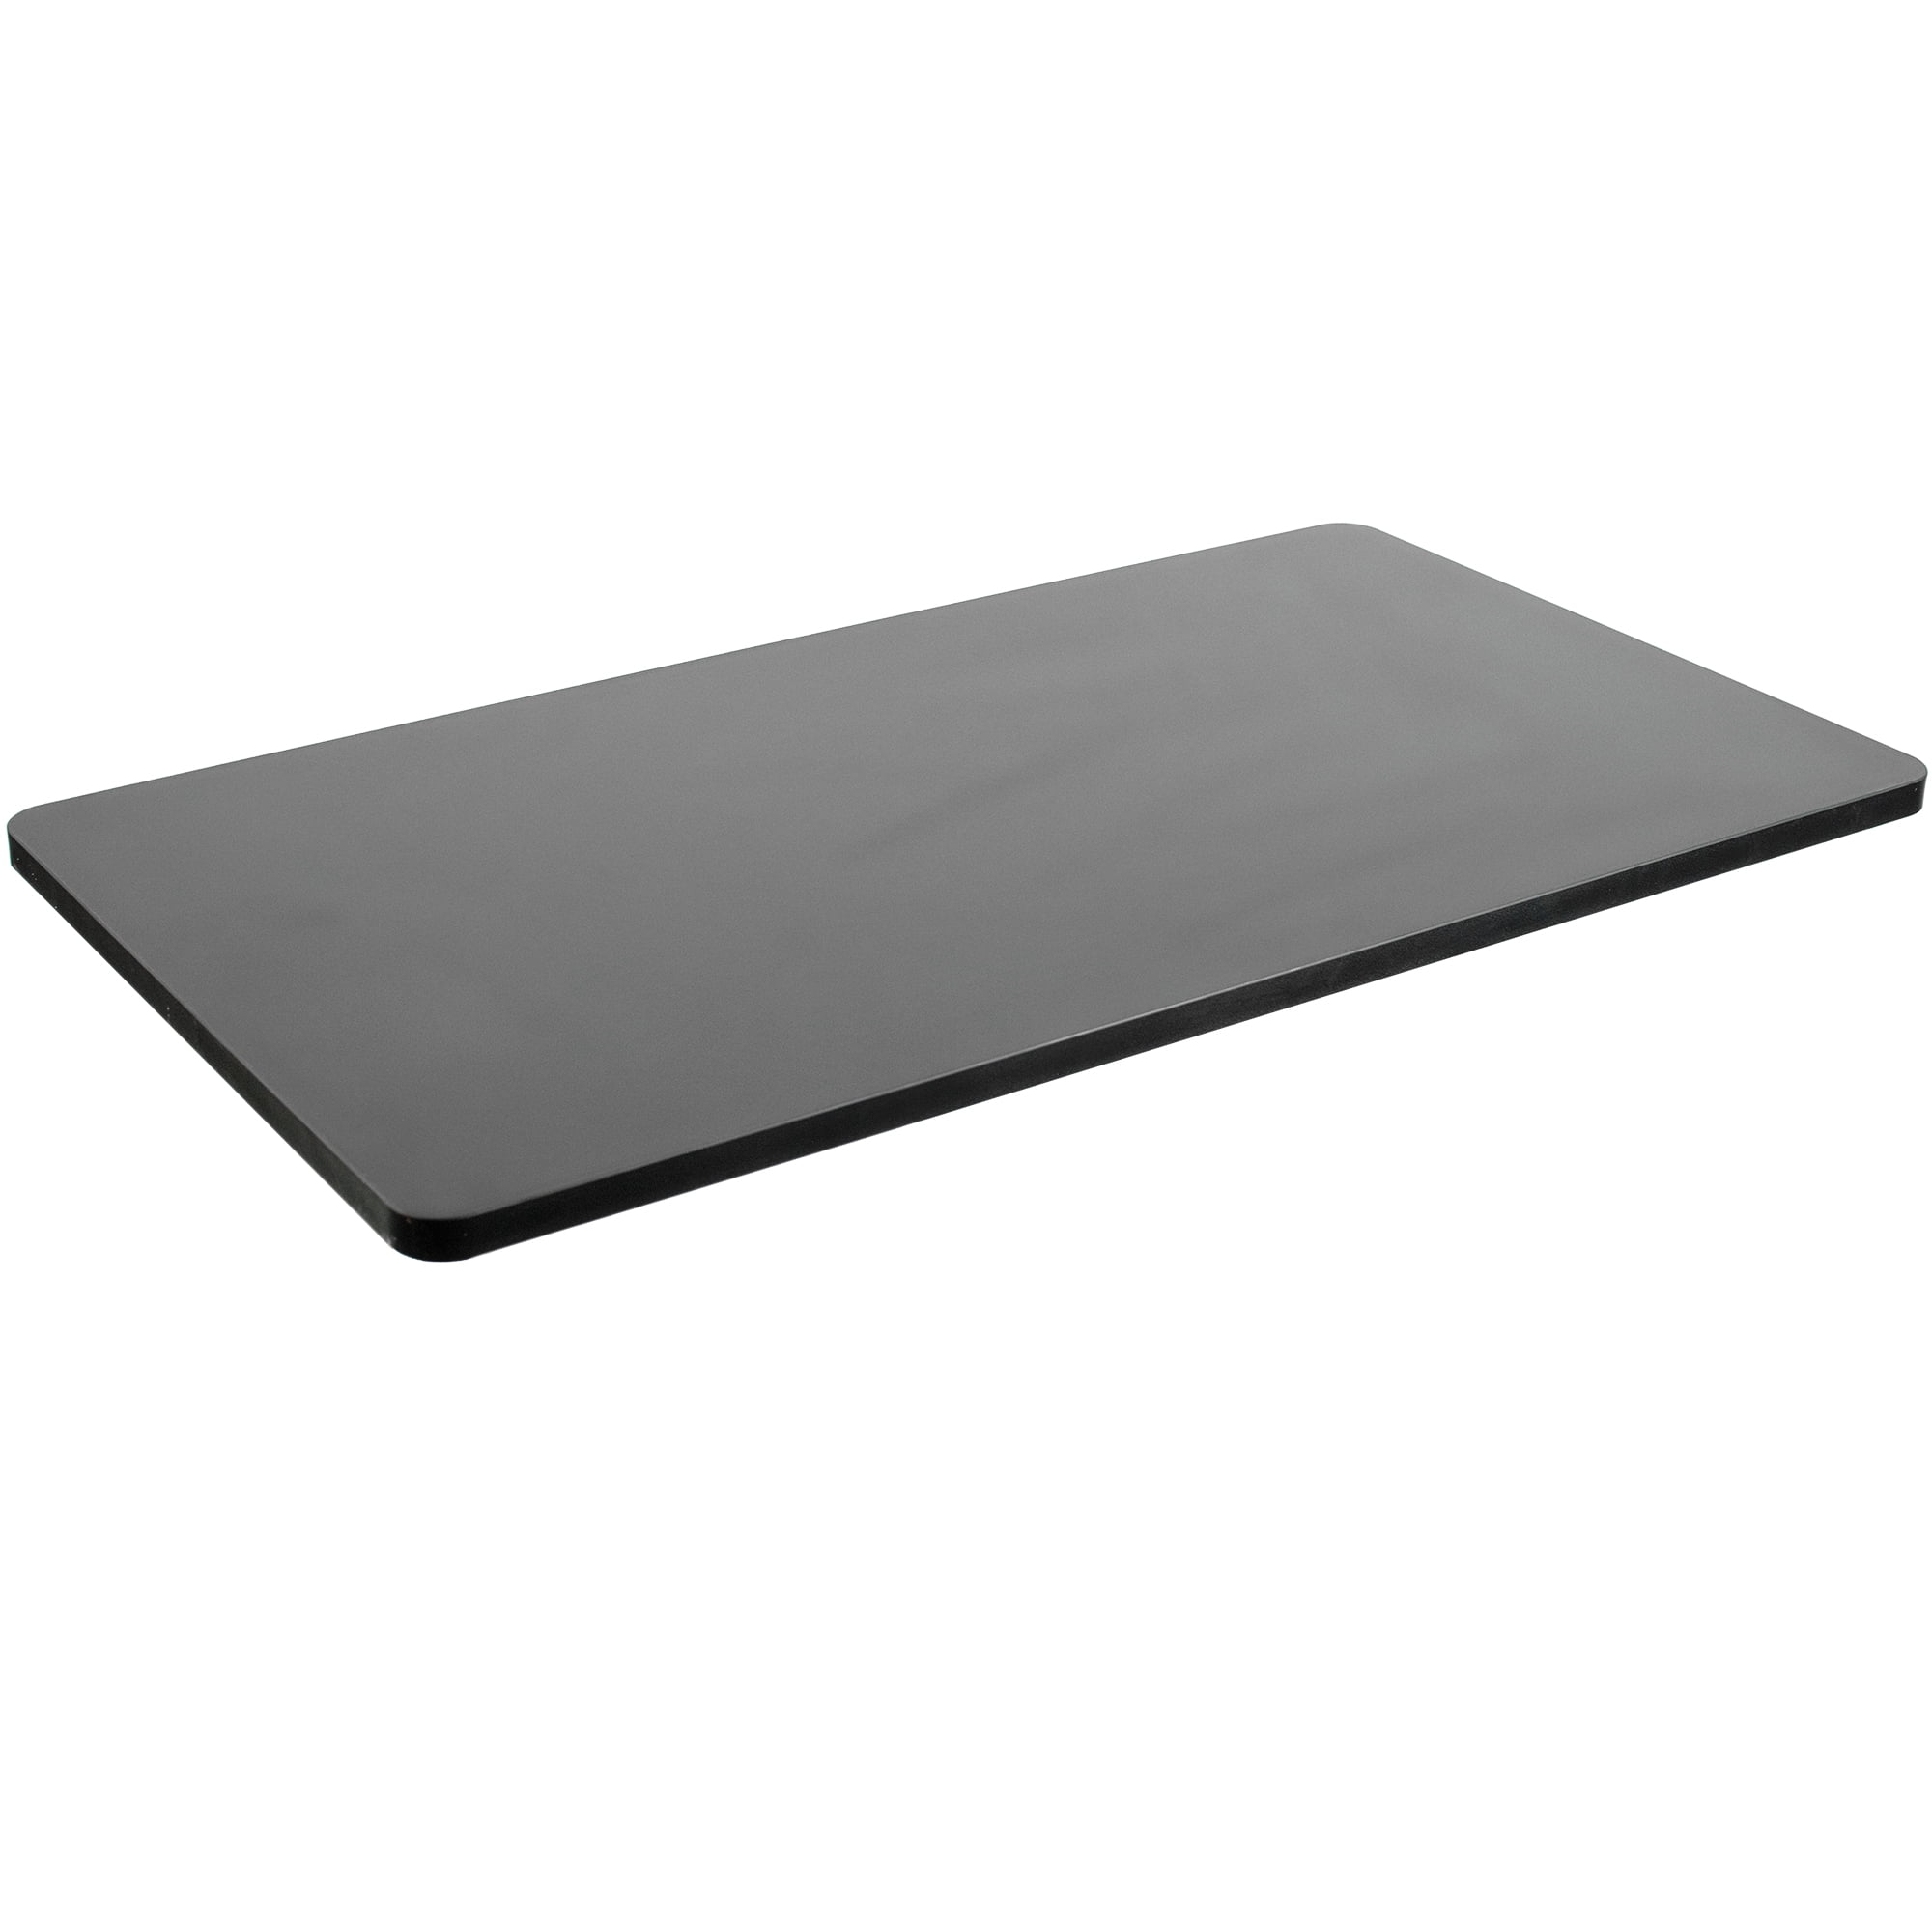 VIVO Black 43 x 24 inch Universal Table Top for Sit to Stand Desk Frames 